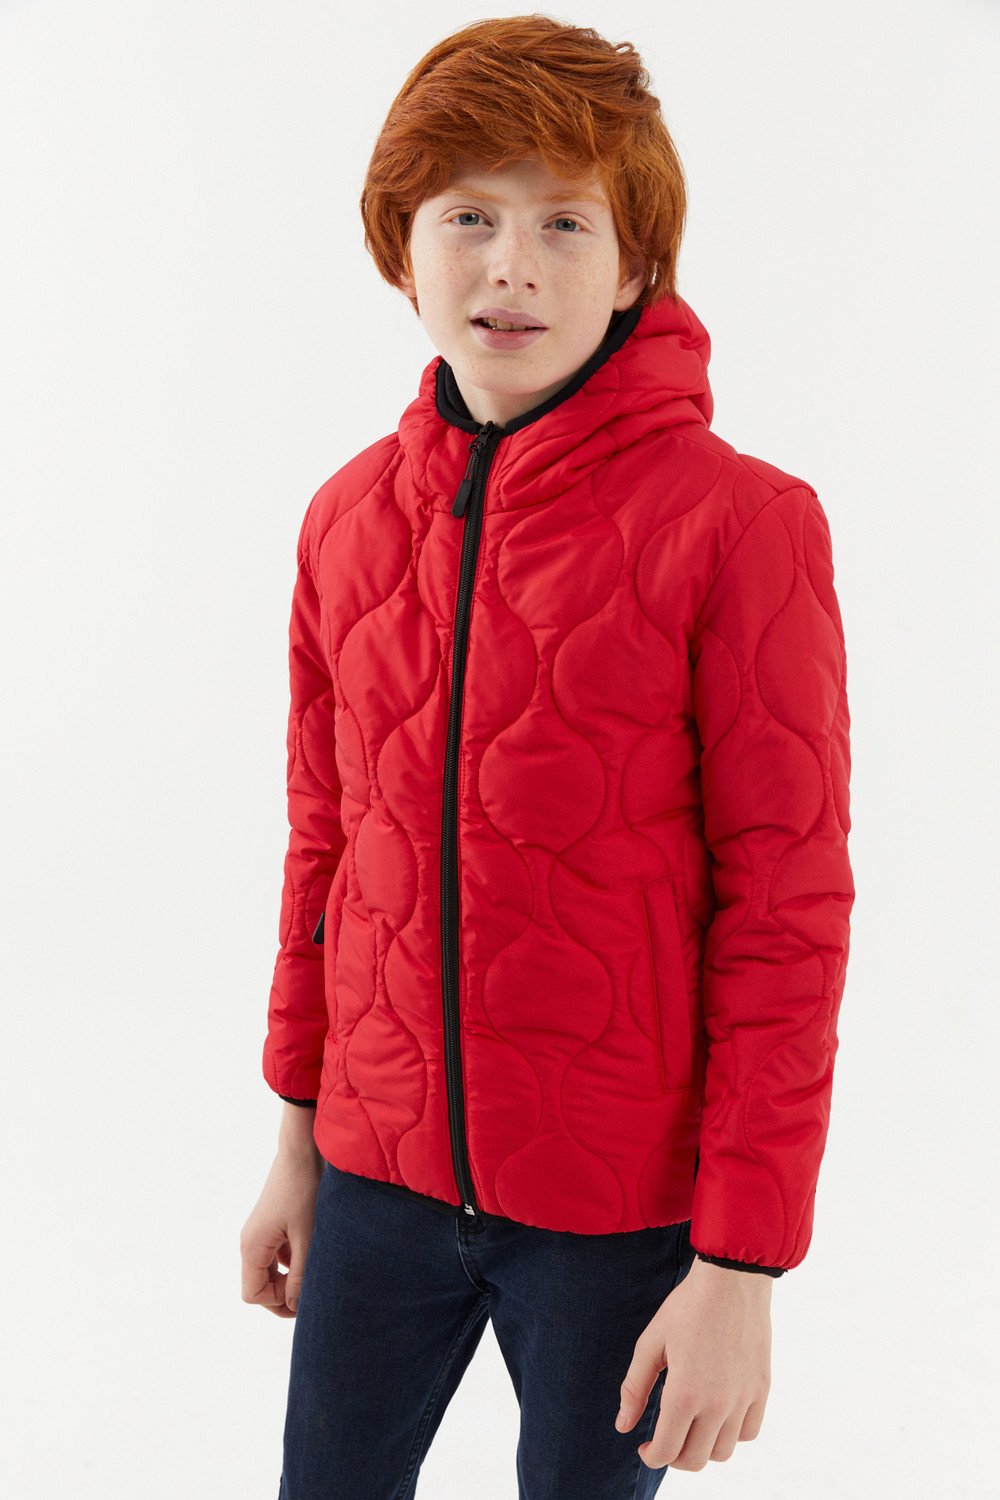 River Club Boys Red Onion Pattern Lined Waterproof And Windproof Hooded Coat.